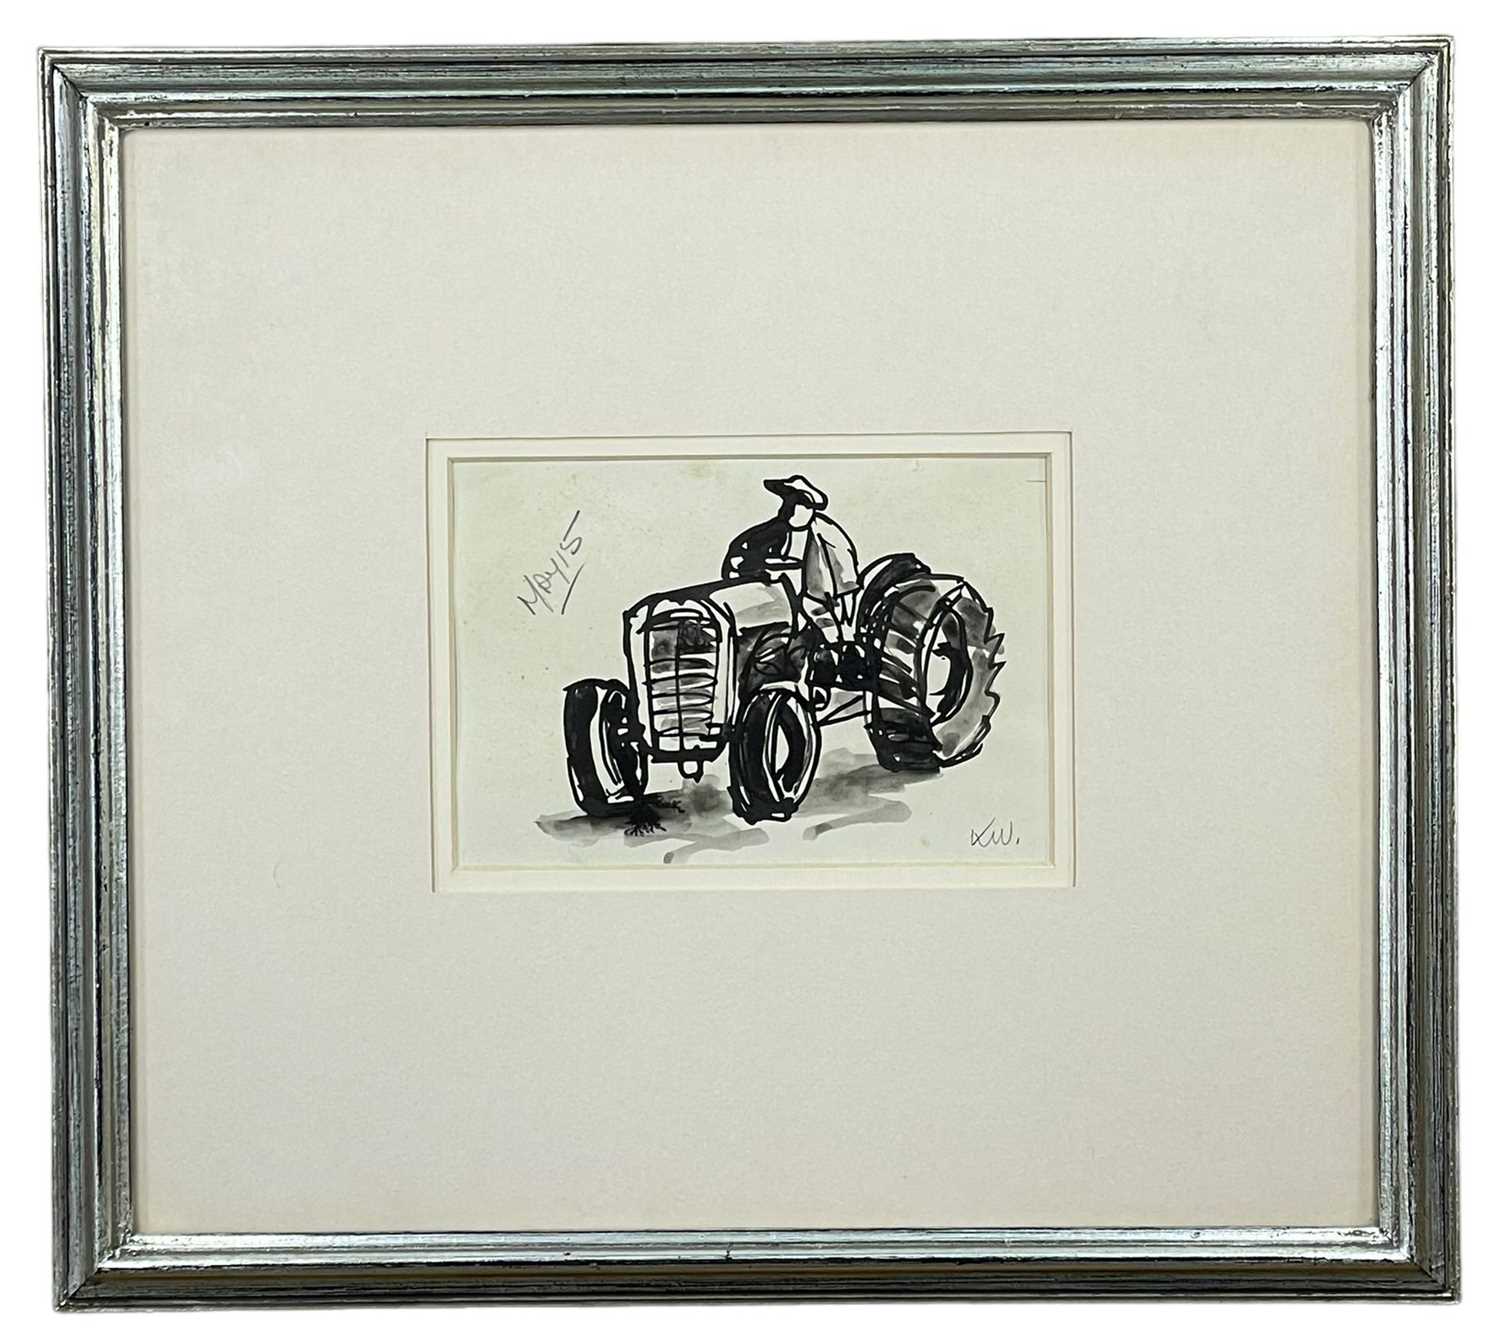 ‡ SIR KYFFIN WILLIAMS RA ink and wash - farmer seated on tractor, inscribed in pencil 'MAY 15', ( - Image 2 of 2